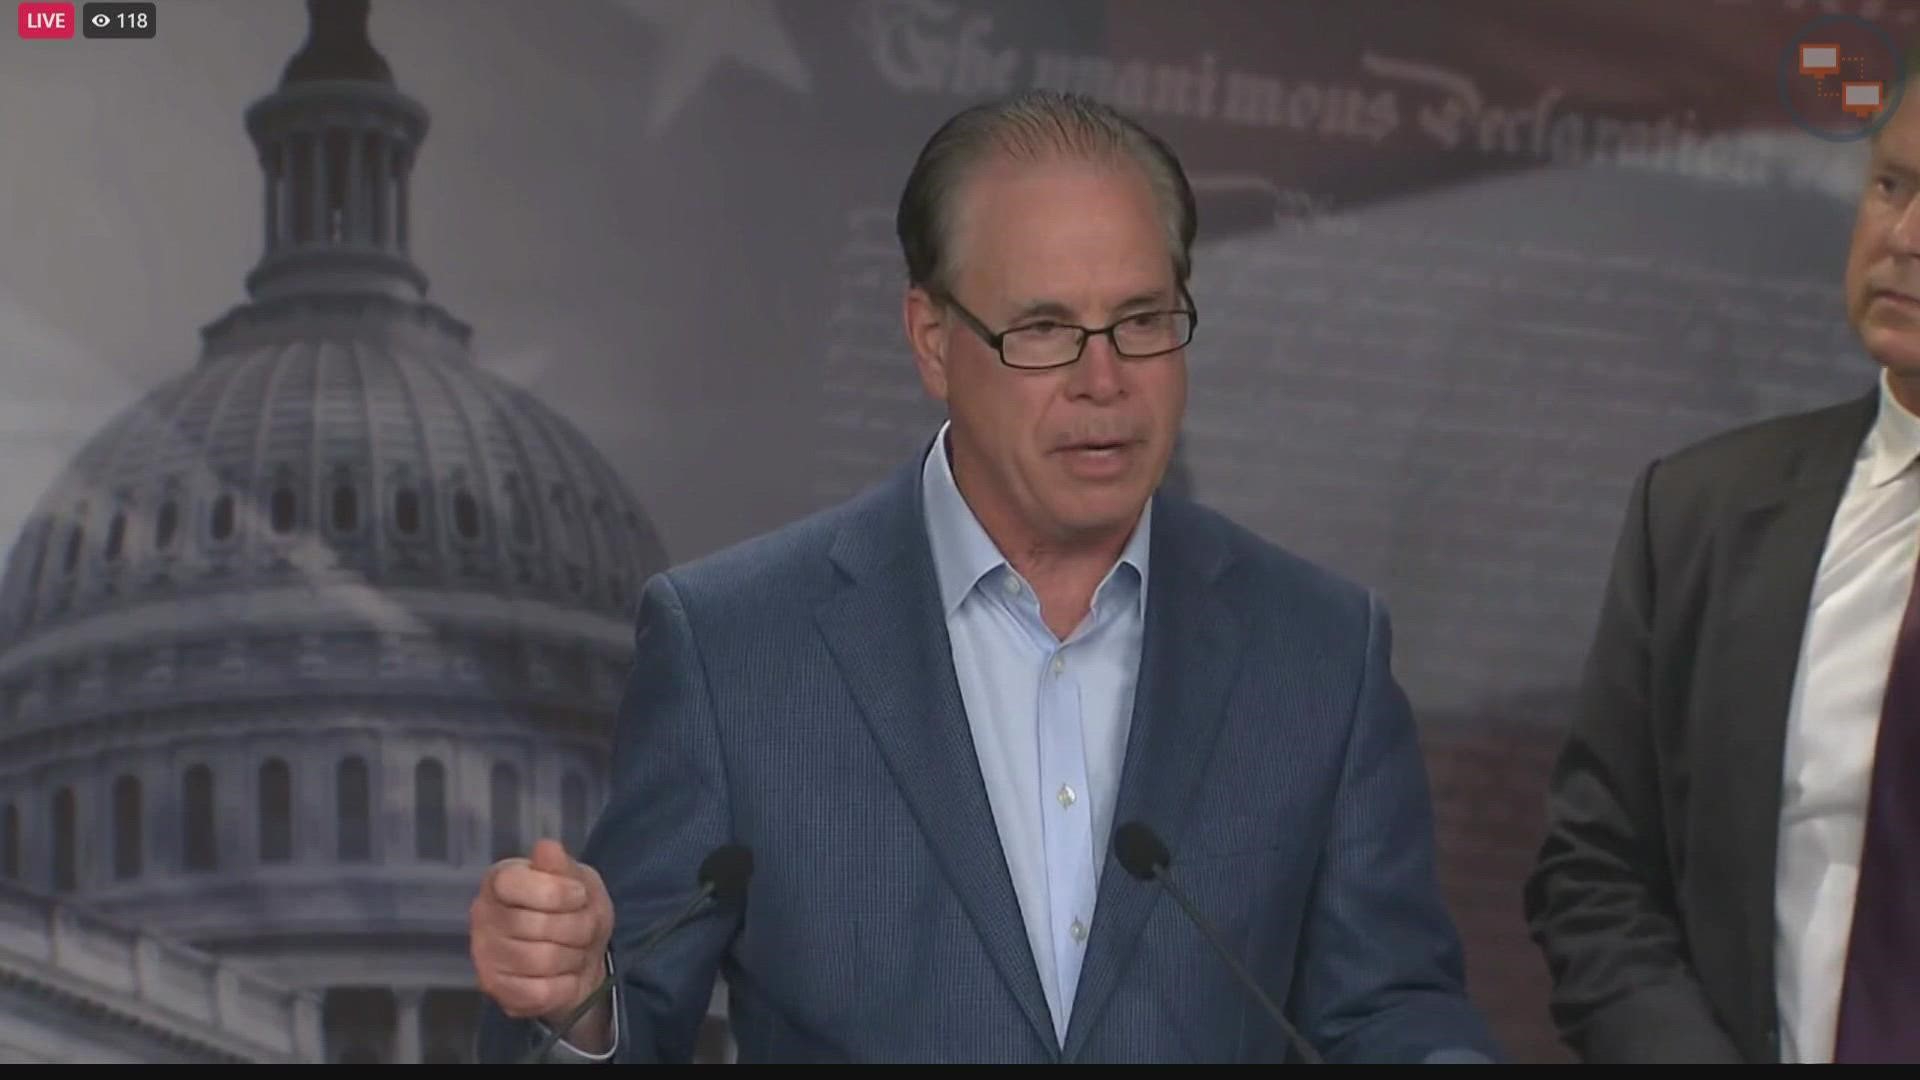 U.S. Senators Mike Braun and Todd Young are joining with other Republicans to challenge President Joe Biden's federal COVID-19 vaccine mandate.